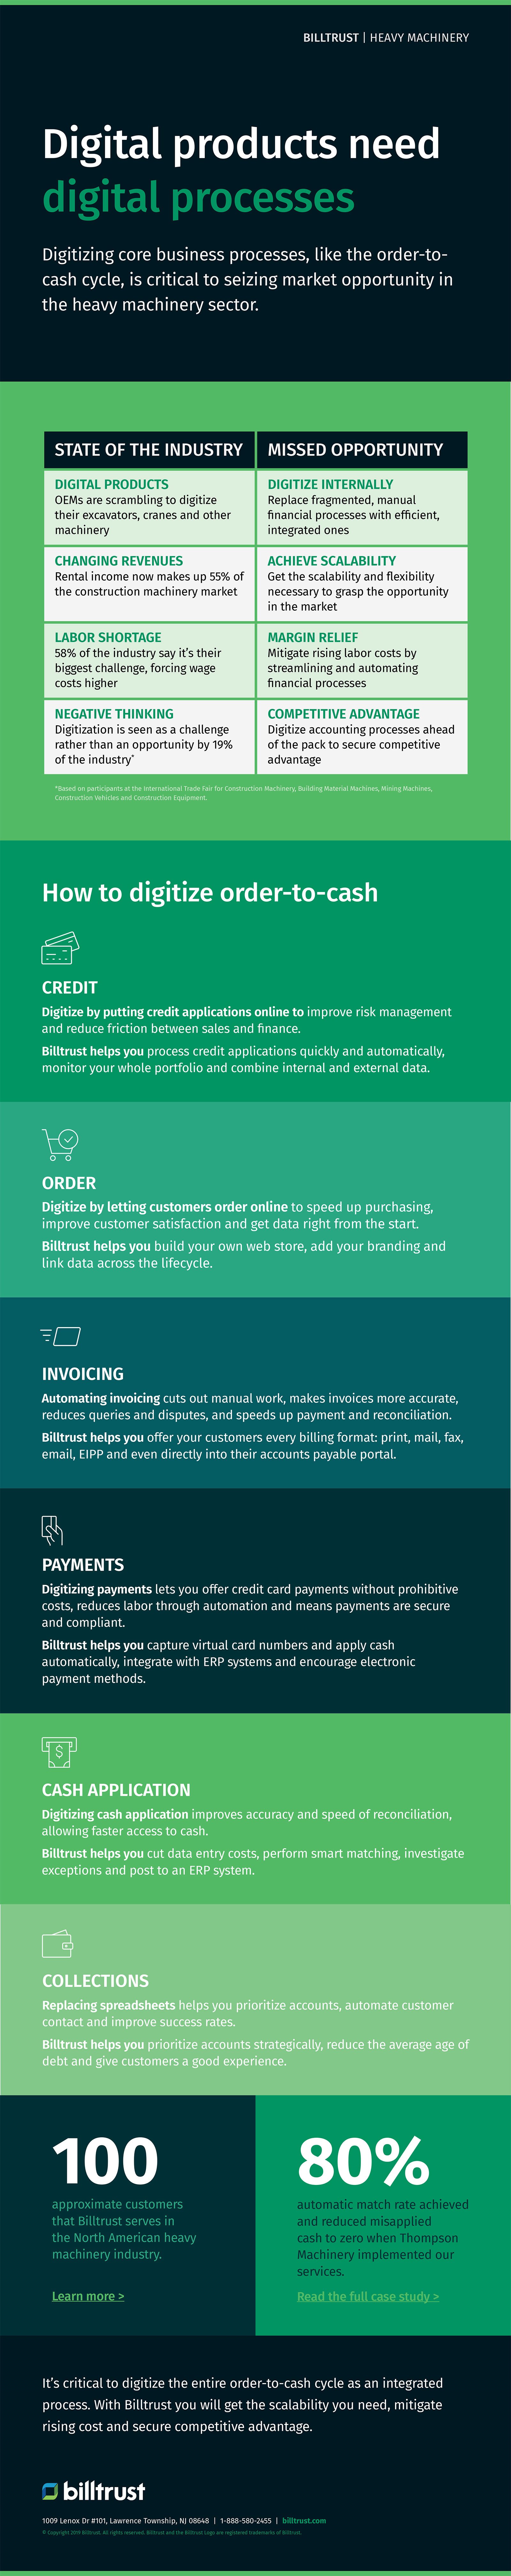 Digital products need digital processes infographic